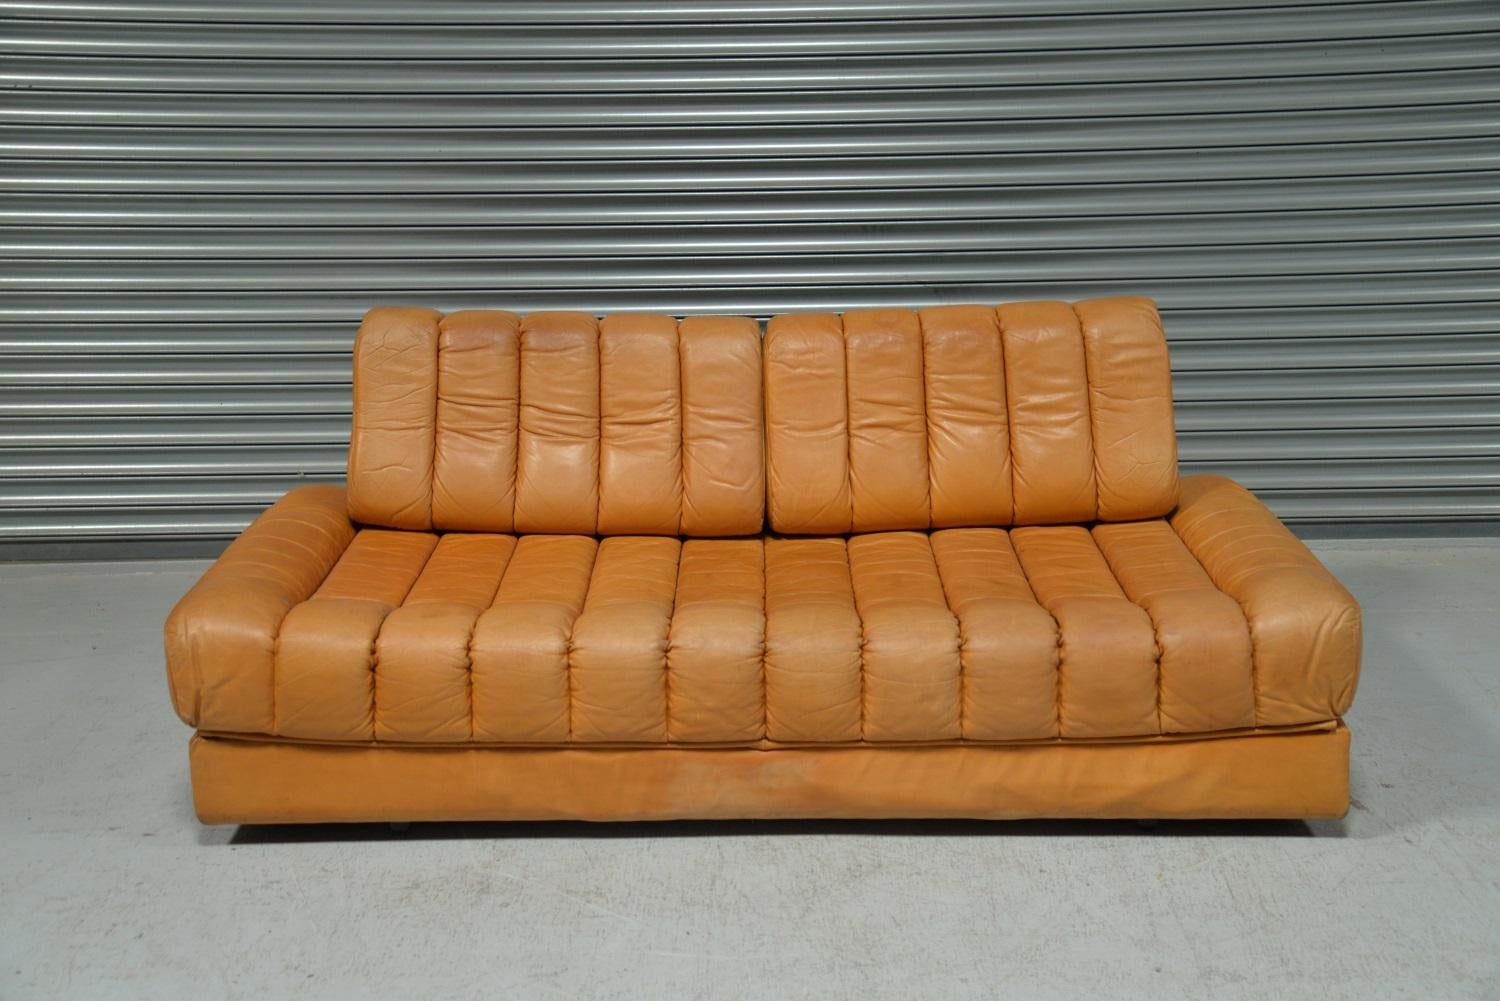 We are delighted to bring to you a highly desirable retro De Sede daybed and sofa. Rarely available and built in the 1960s by De Sede craftsman in Switzerland, this versatile retro daybed doubles up as a sofa and loveseat. This extremely comfortable